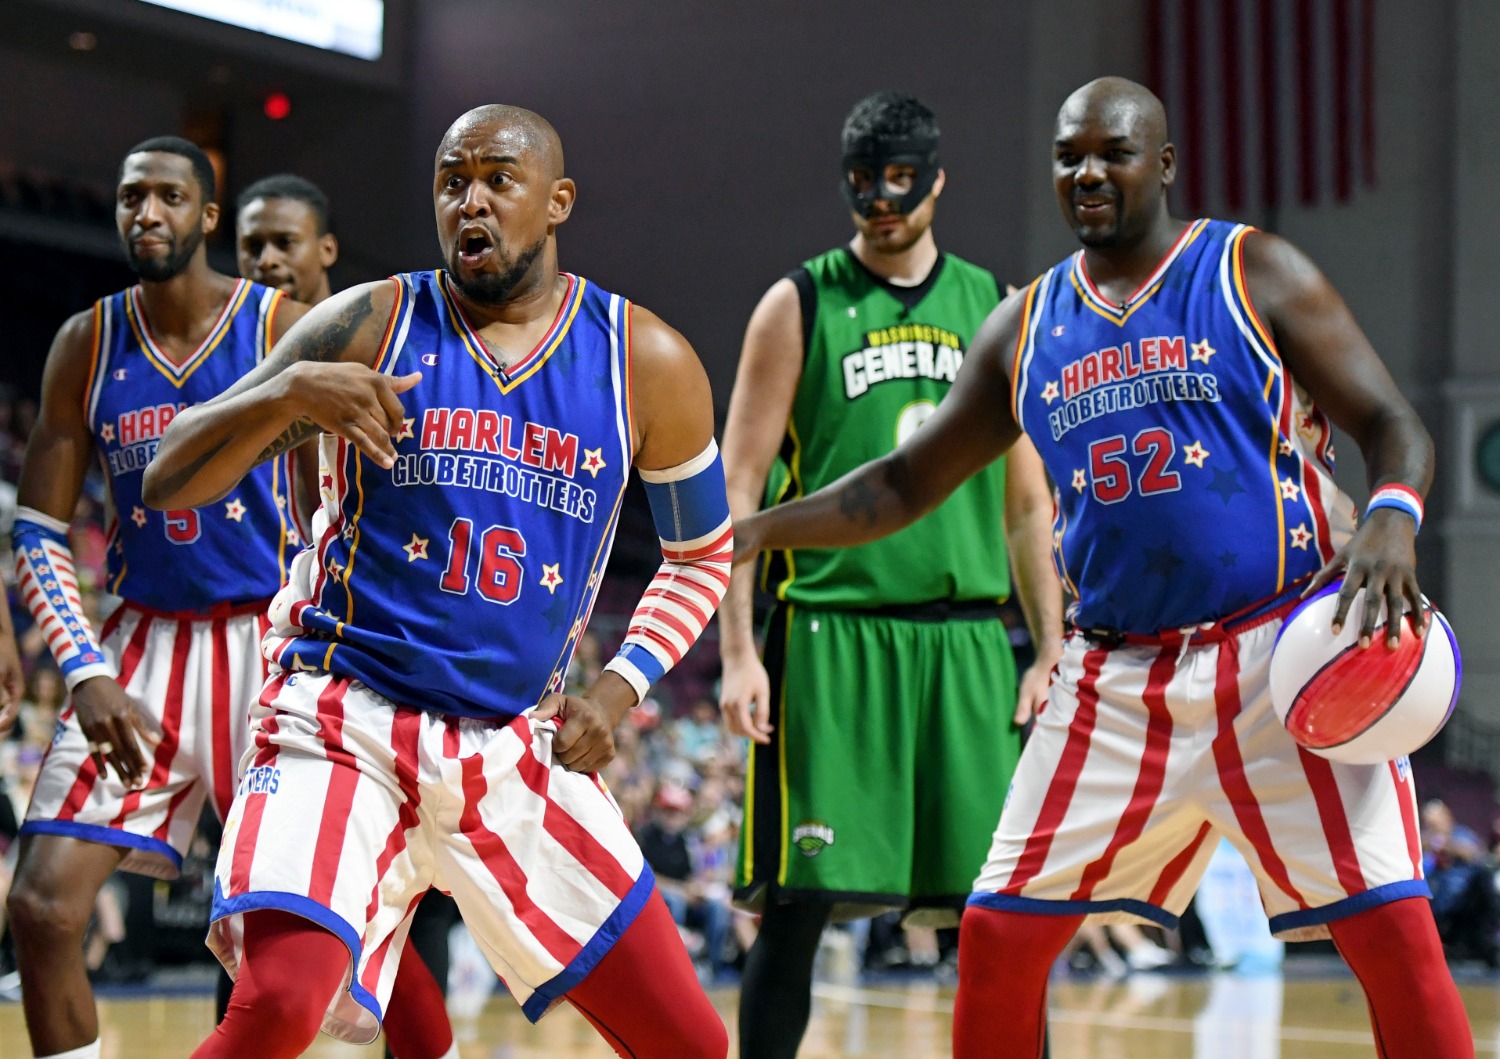 The Harlem Globetrotters could be the solution to the Redskins name change dilemma.